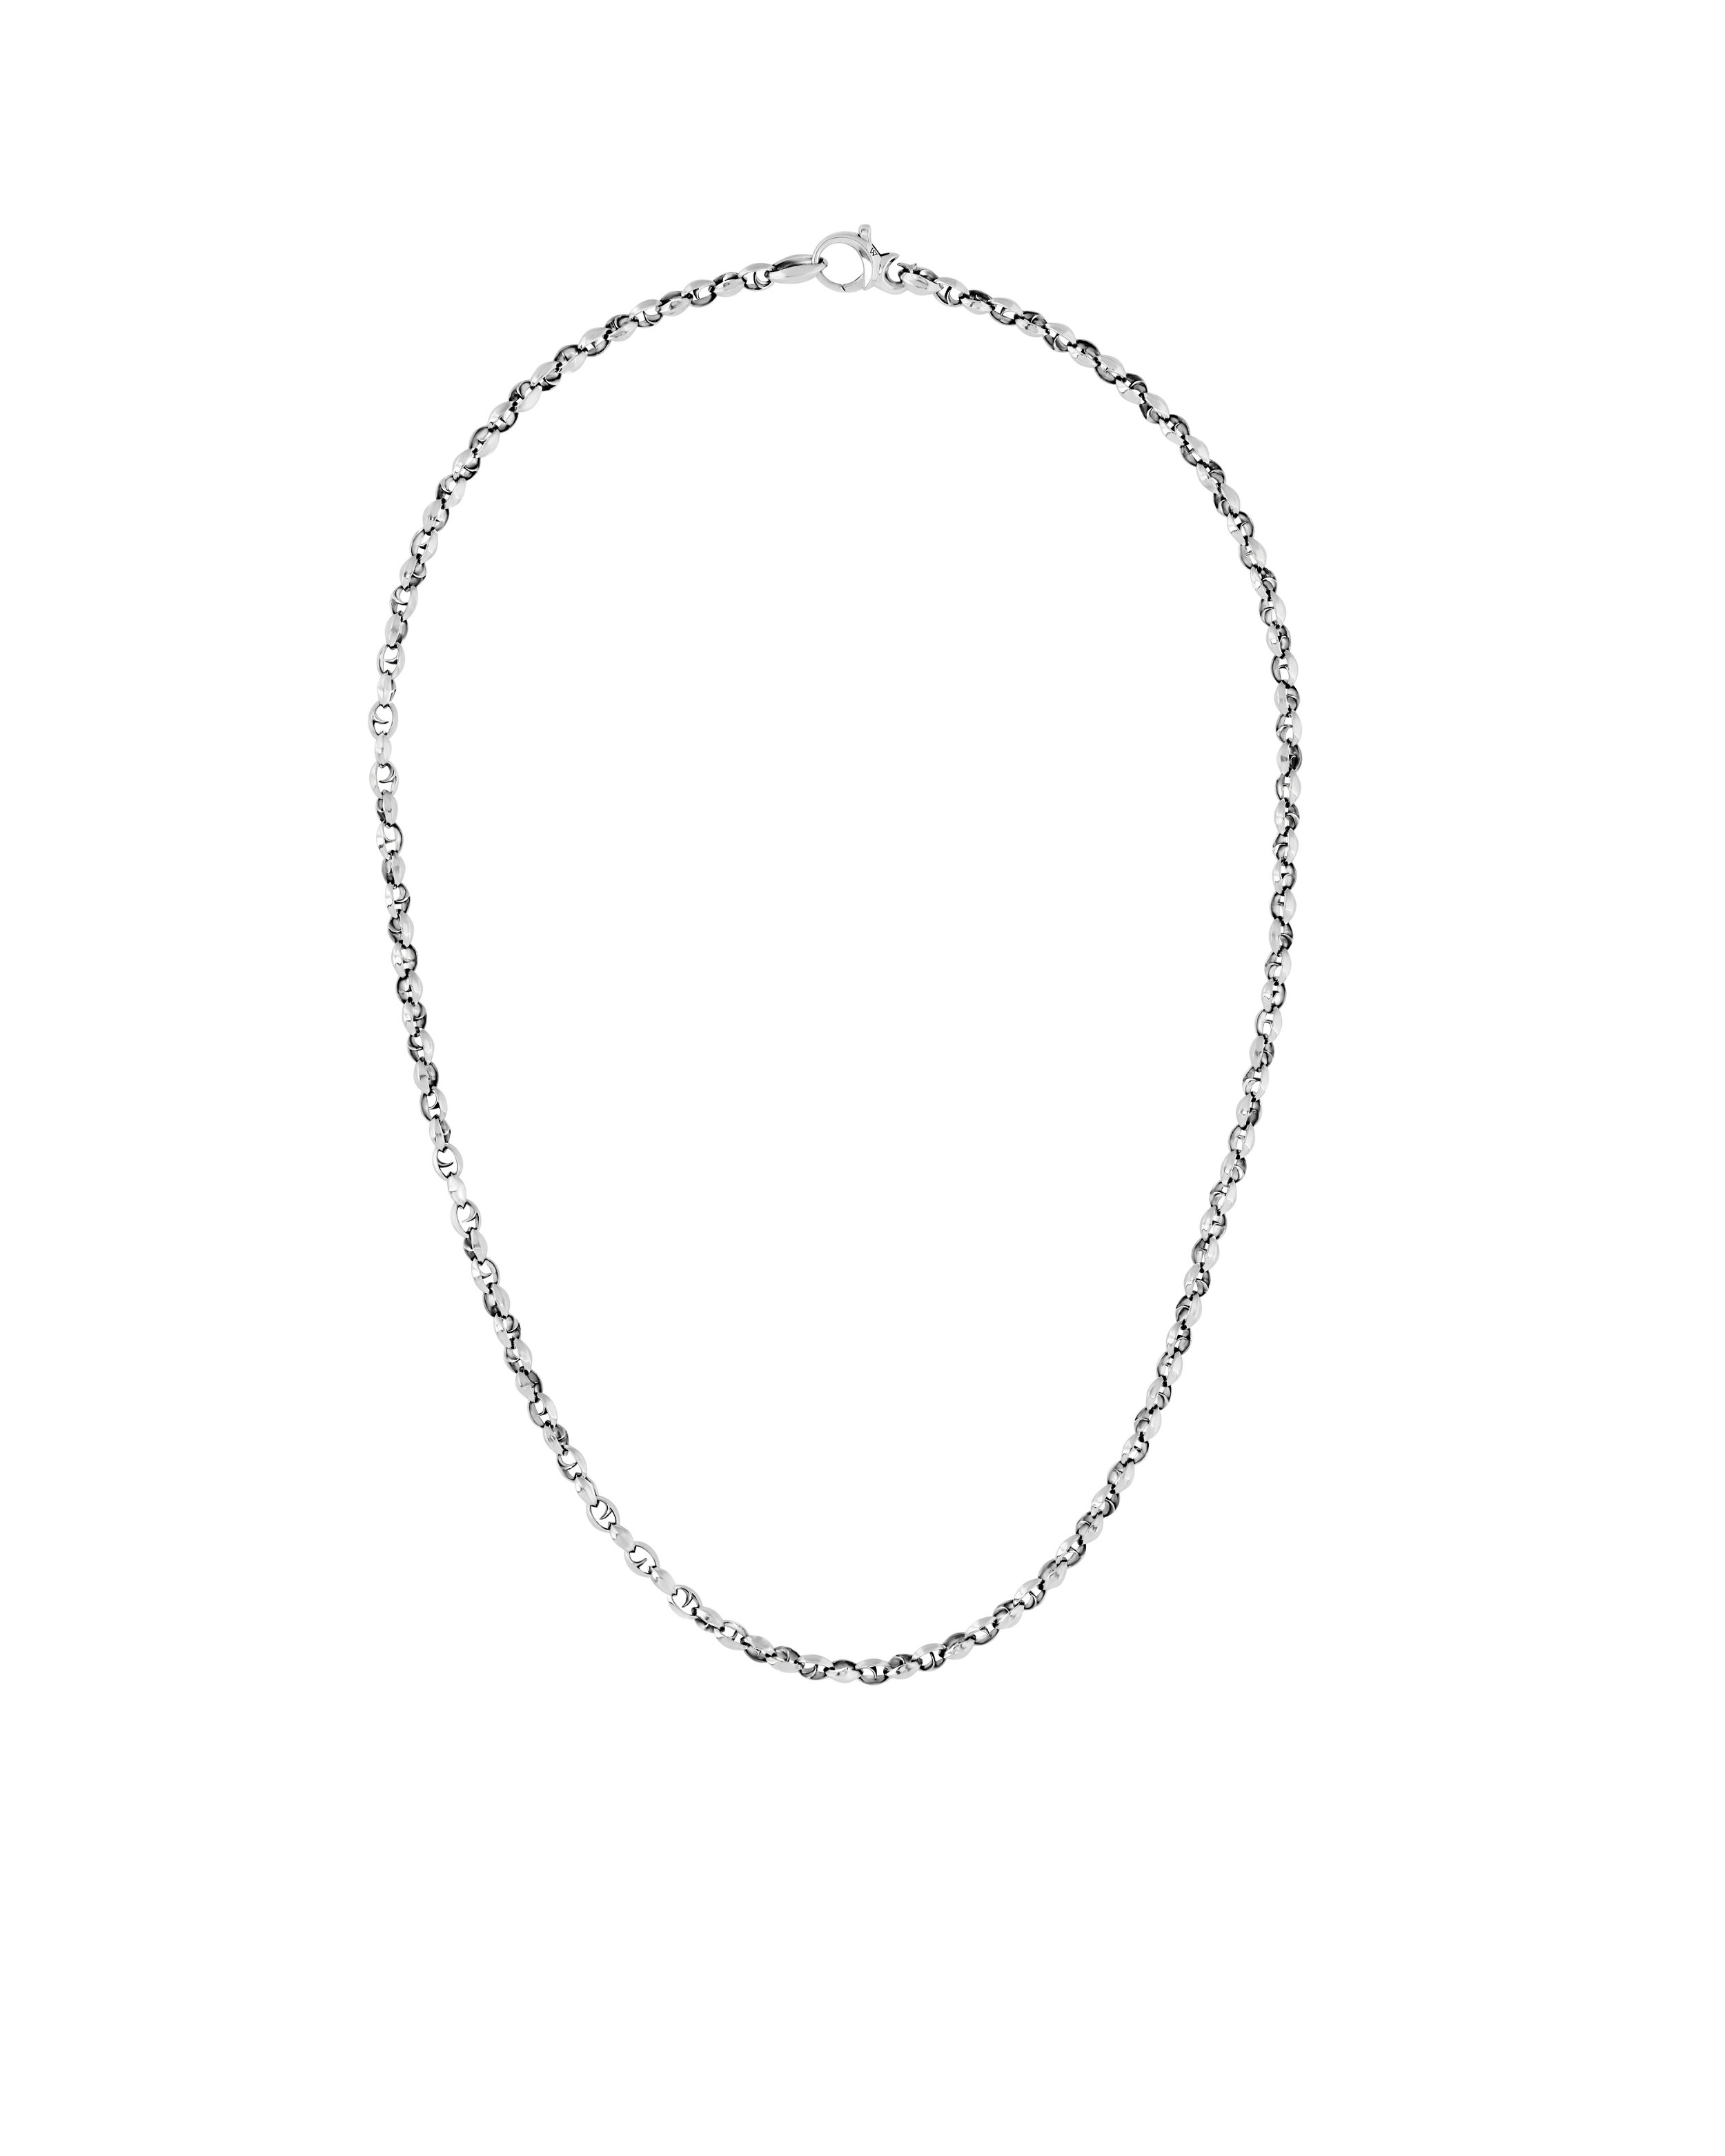 Thorn Addiction Classic Medium Link Chain Necklace in Sterling Silver - 19"